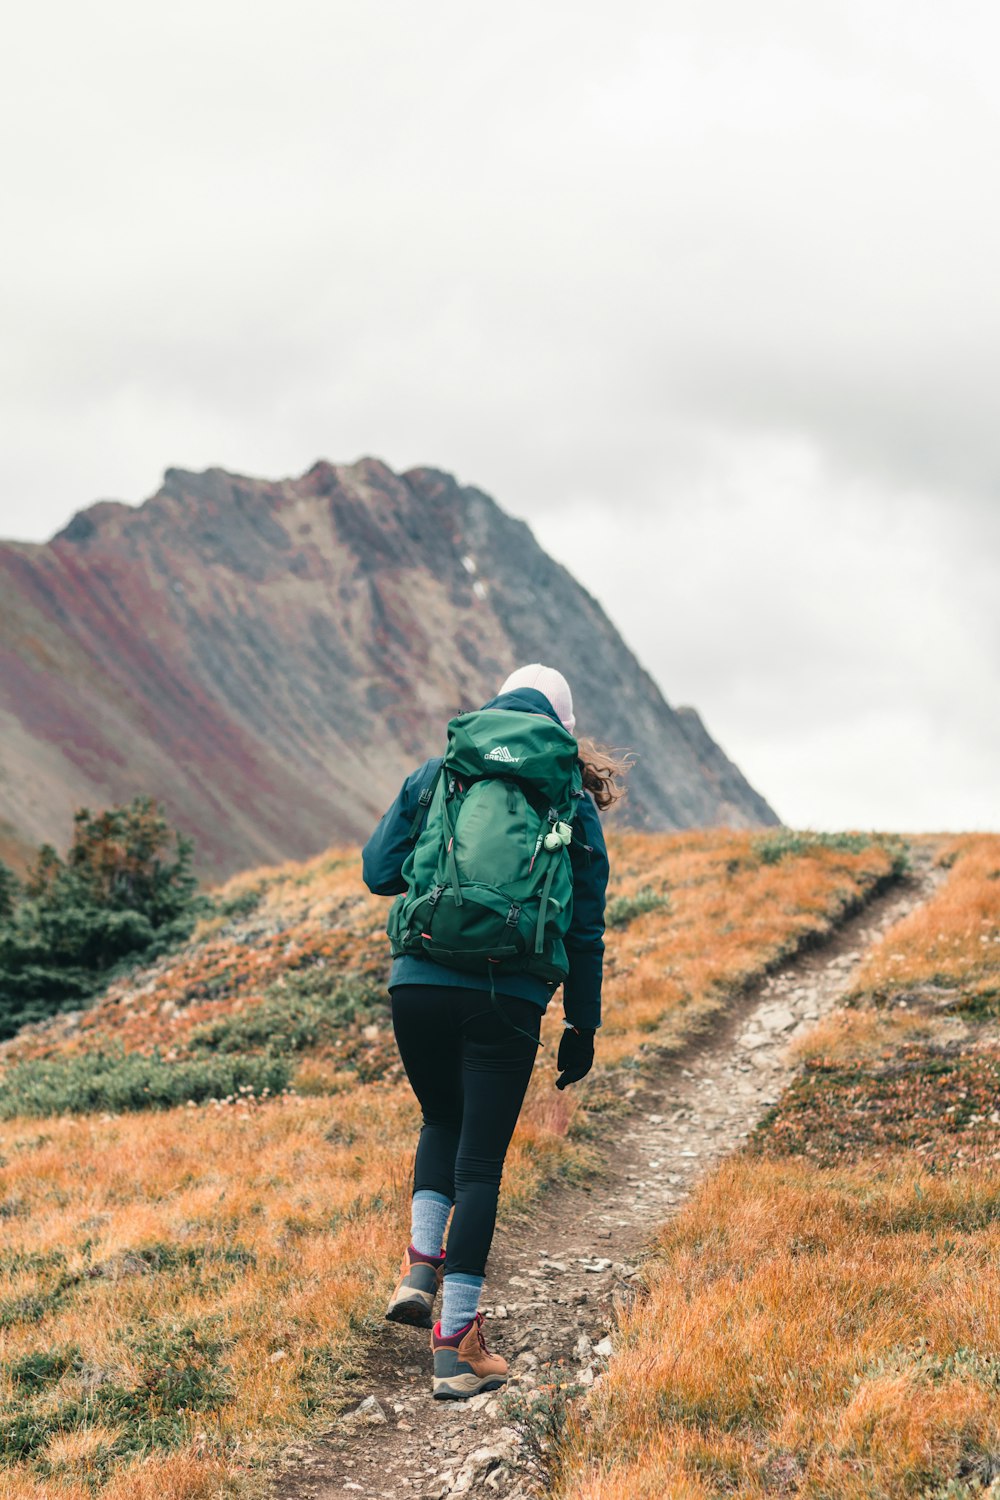 Hiking Girl Pictures  Download Free Images on Unsplash